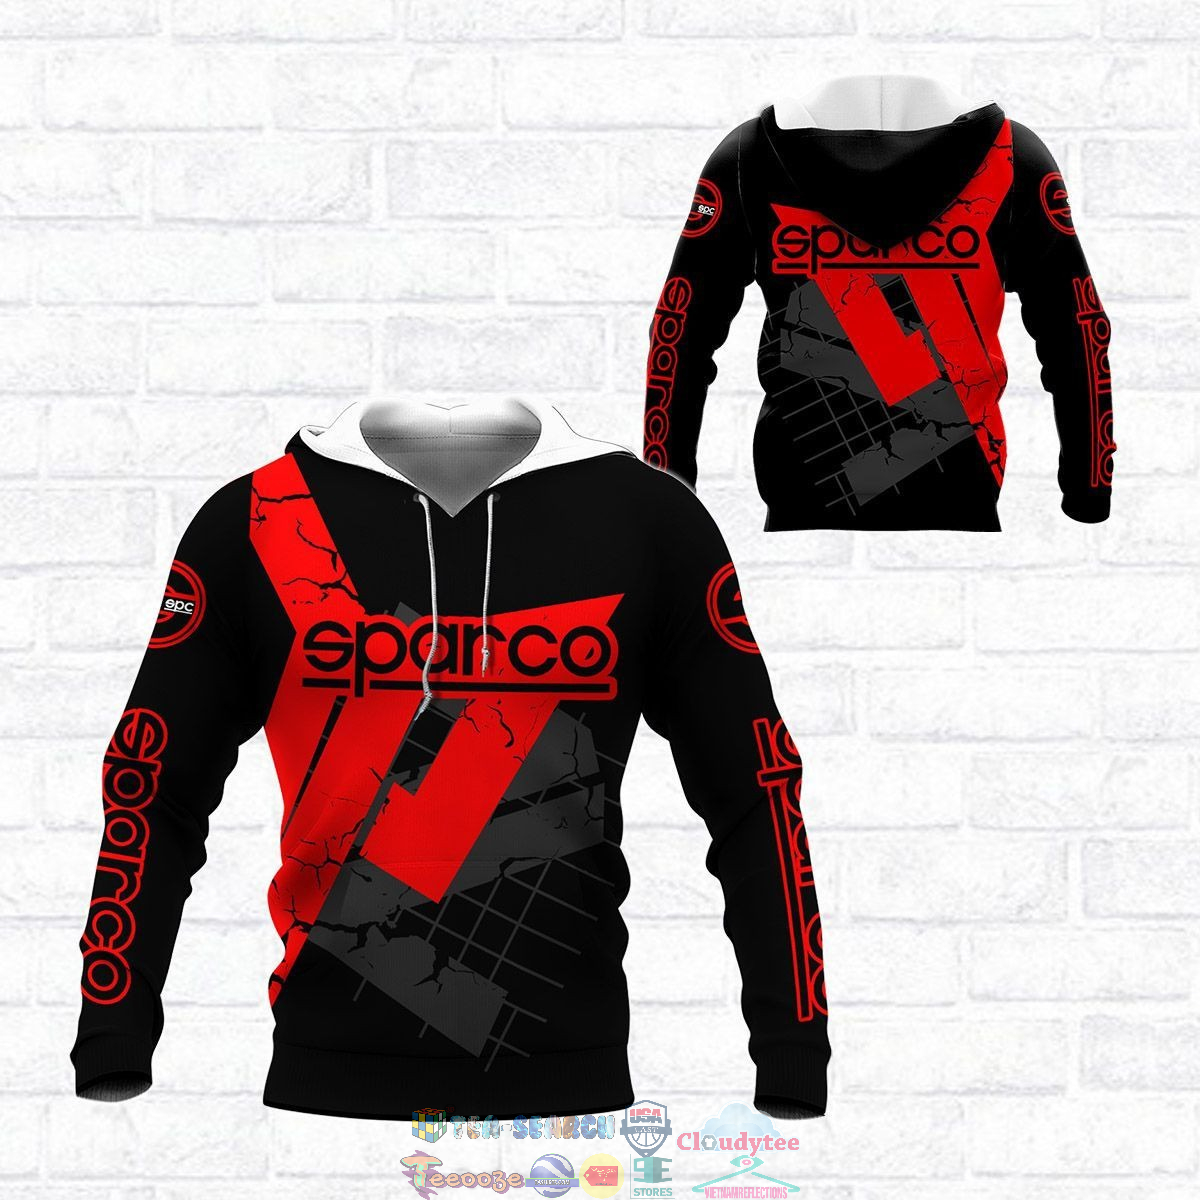 Sparco ver 25 3D hoodie and t-shirt